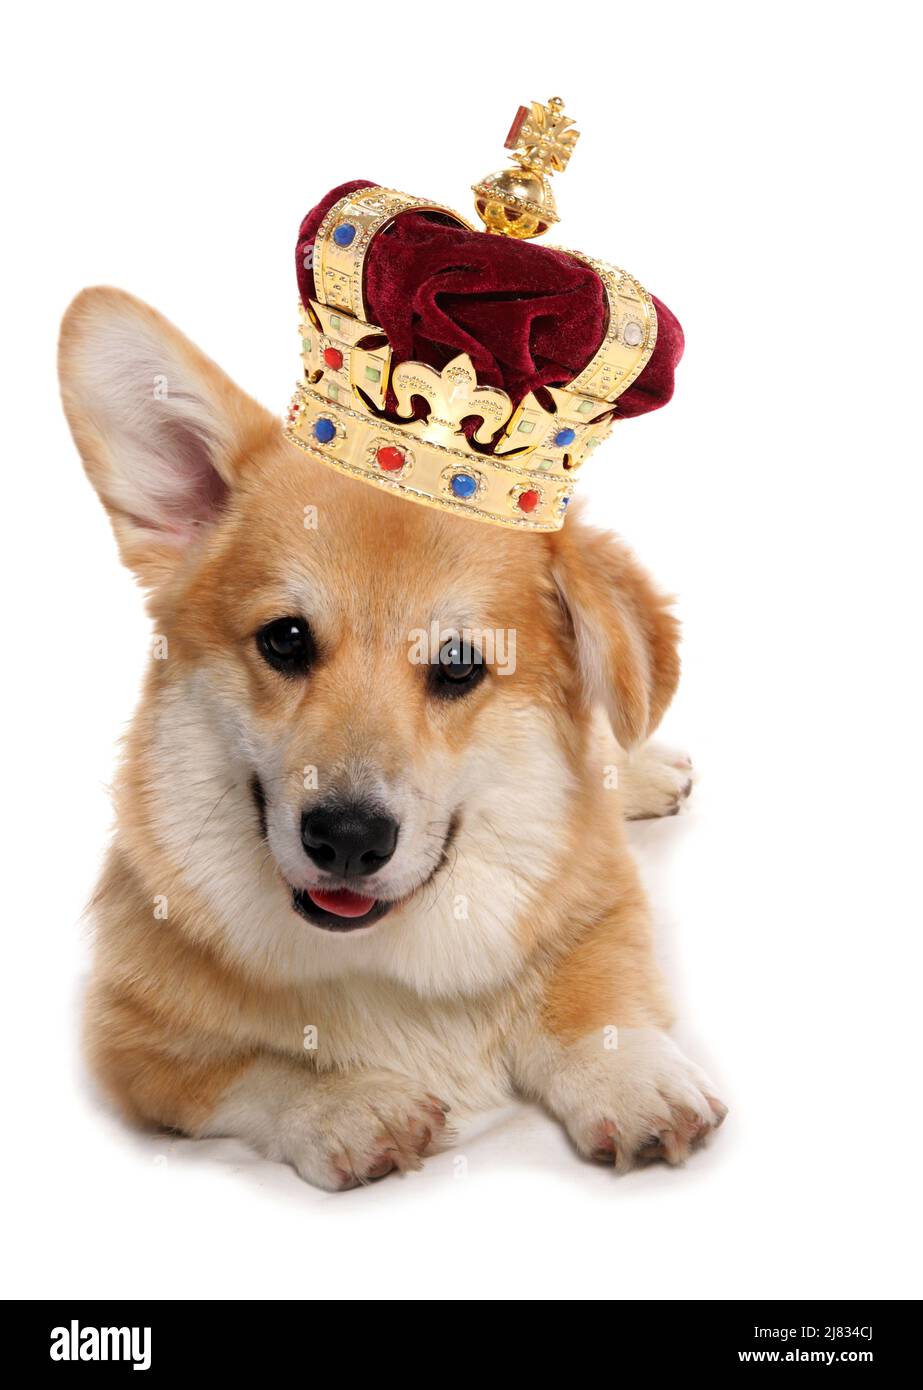 Corgi dog wearing a crown for the royal jubilee celebration cutout on a white background Stock Photo